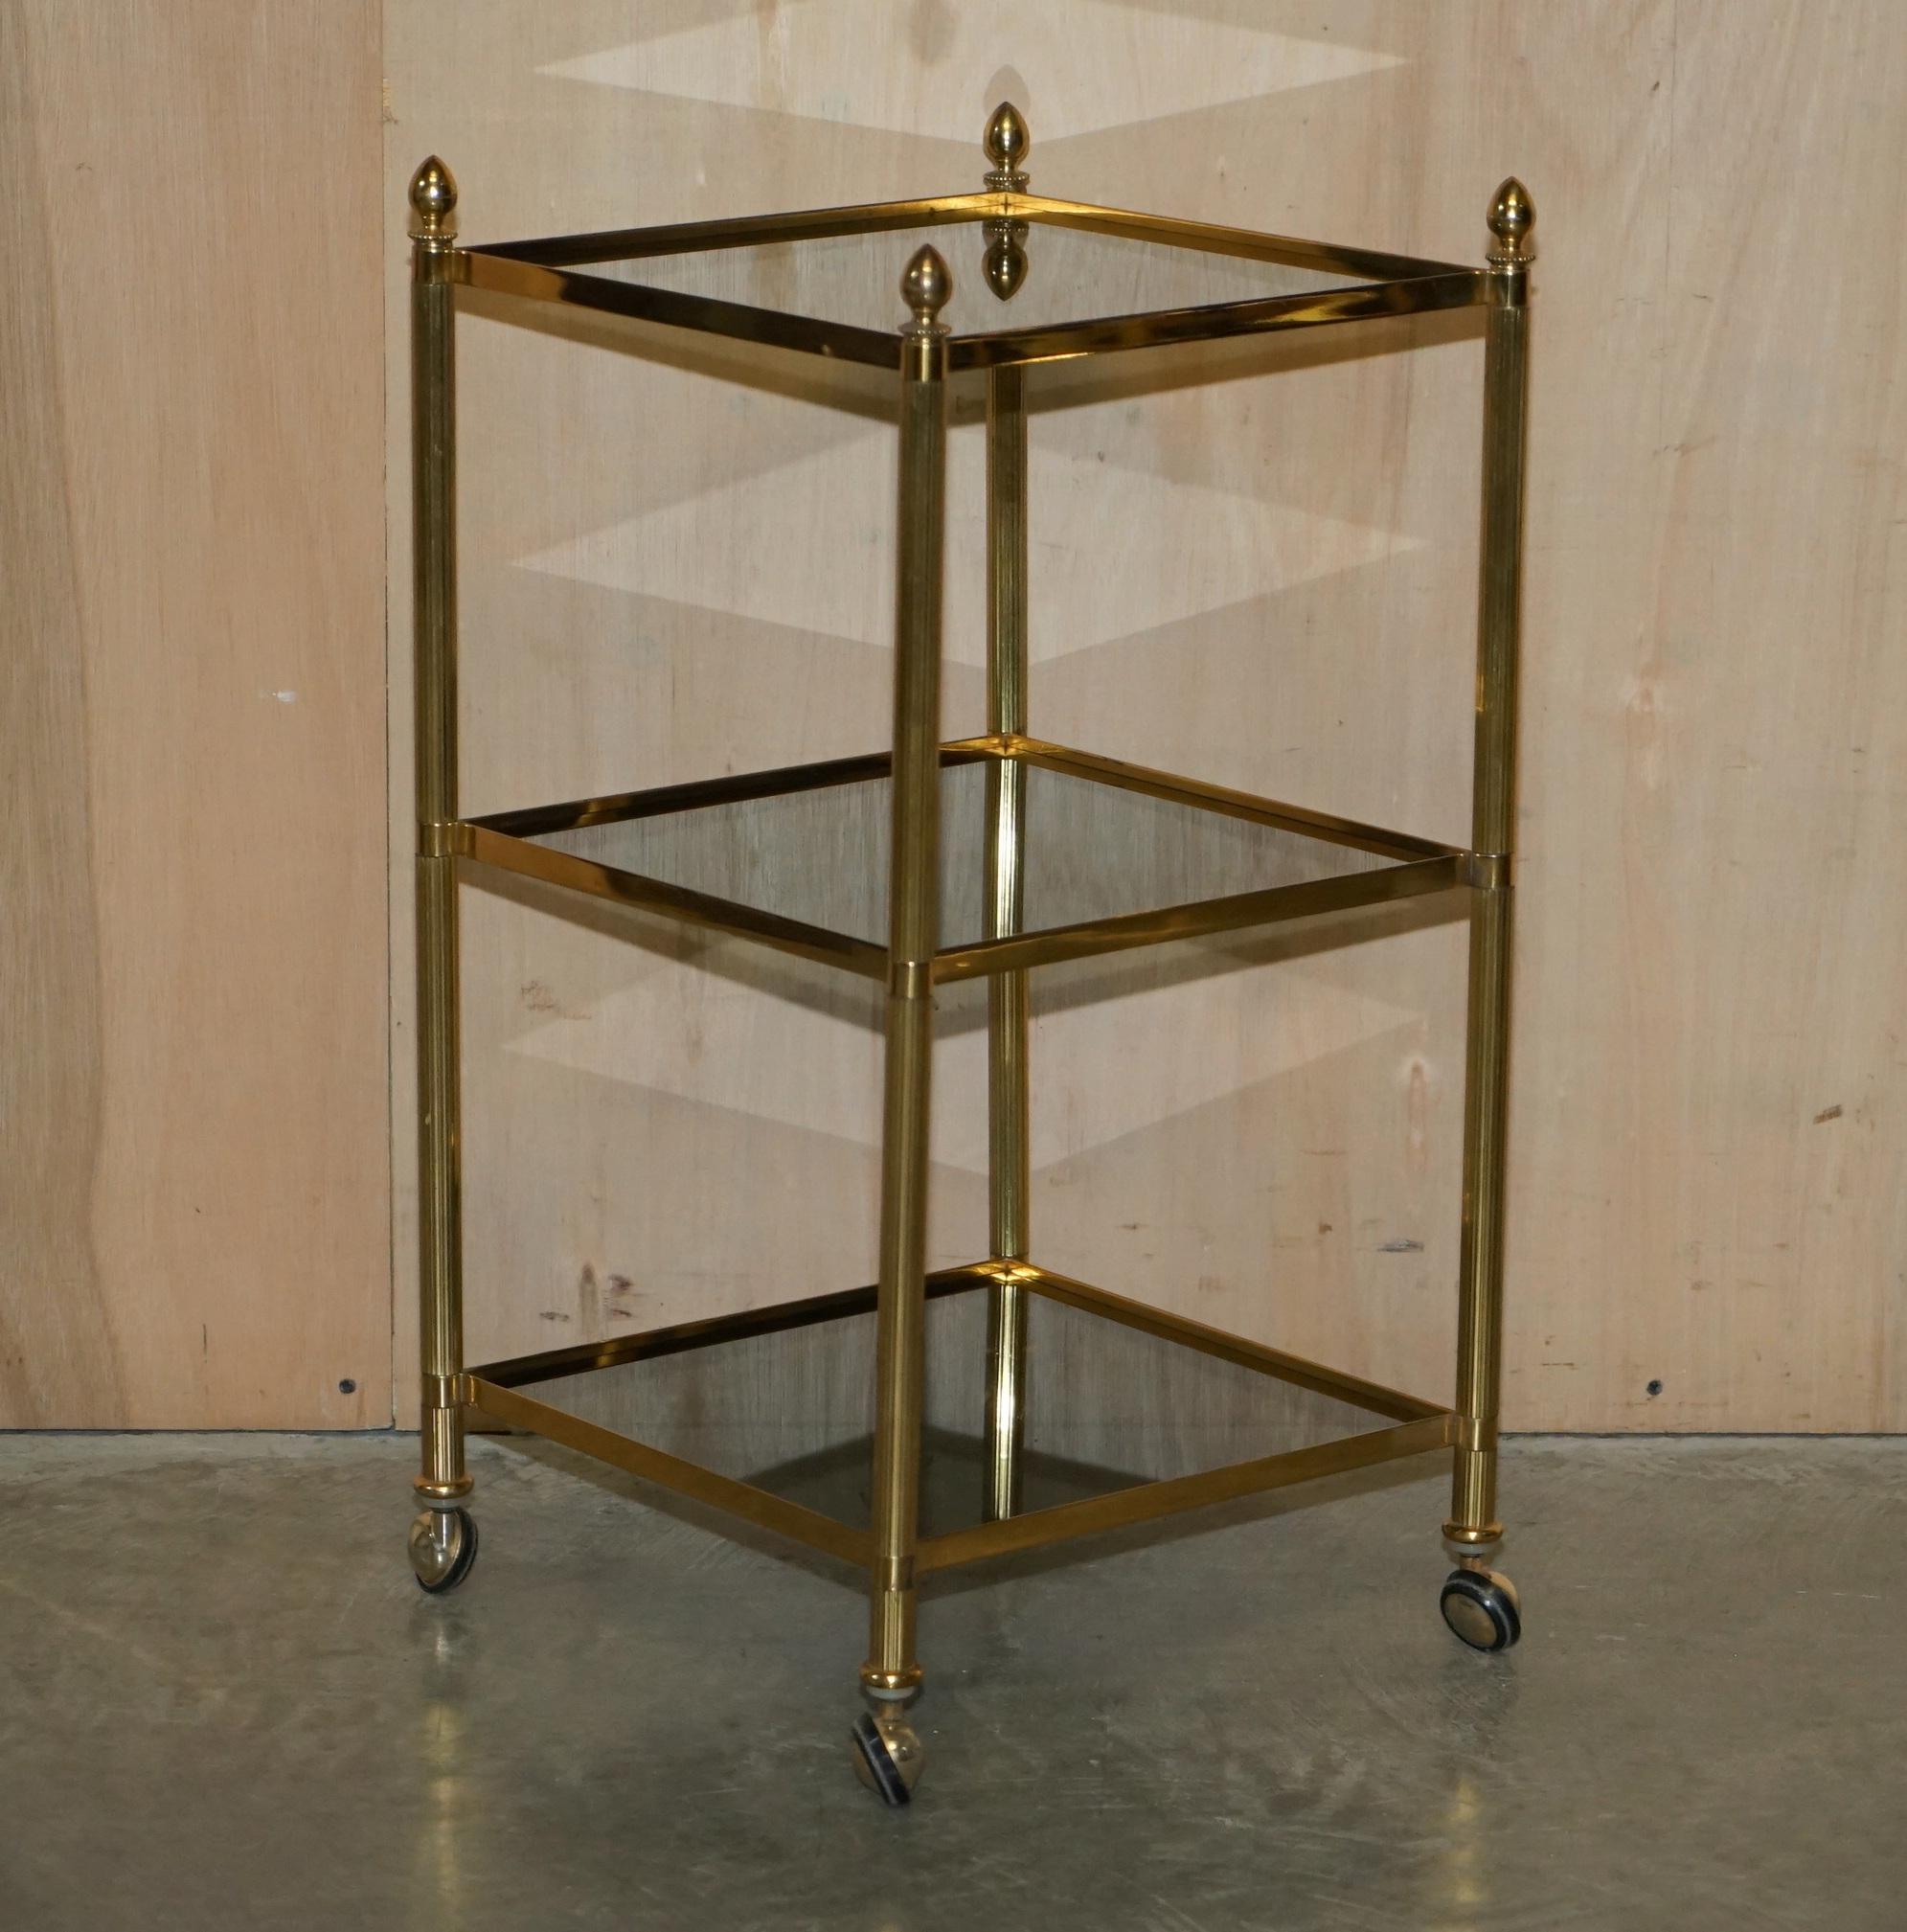 We are delighted to offer for sale this pair of stunning mid century modern brass and smoked glass Etagere tables in the Maison Jansen style.

A truly stunning pair, they have the original castors and smoked glass shelves, I also have a smaller